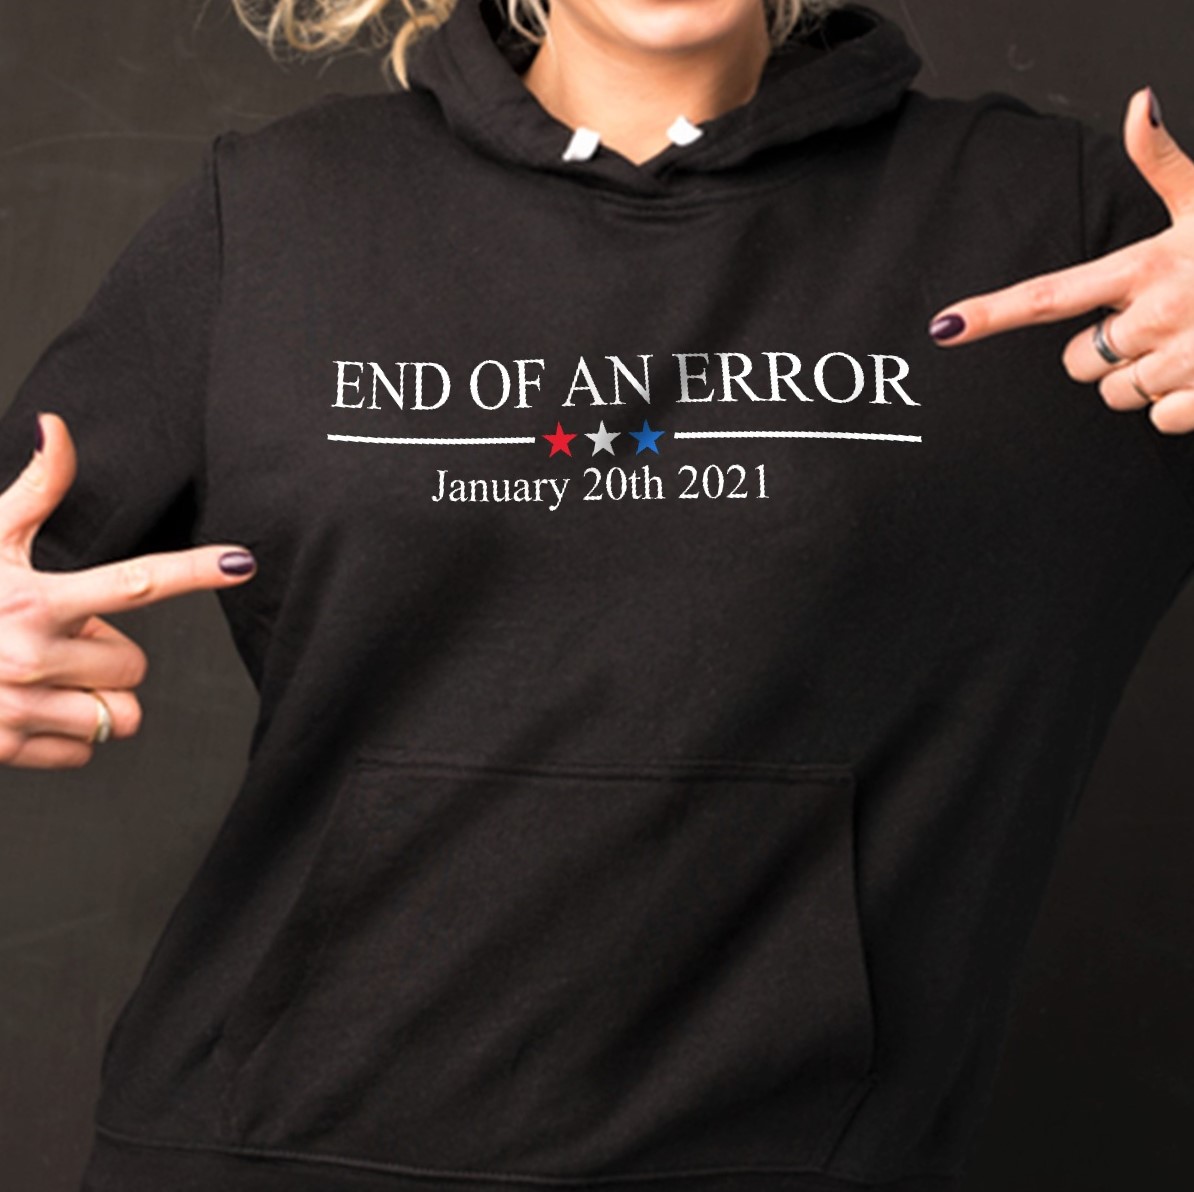 'End of an Error': Special T-shirts for January 20, 2021, are here!